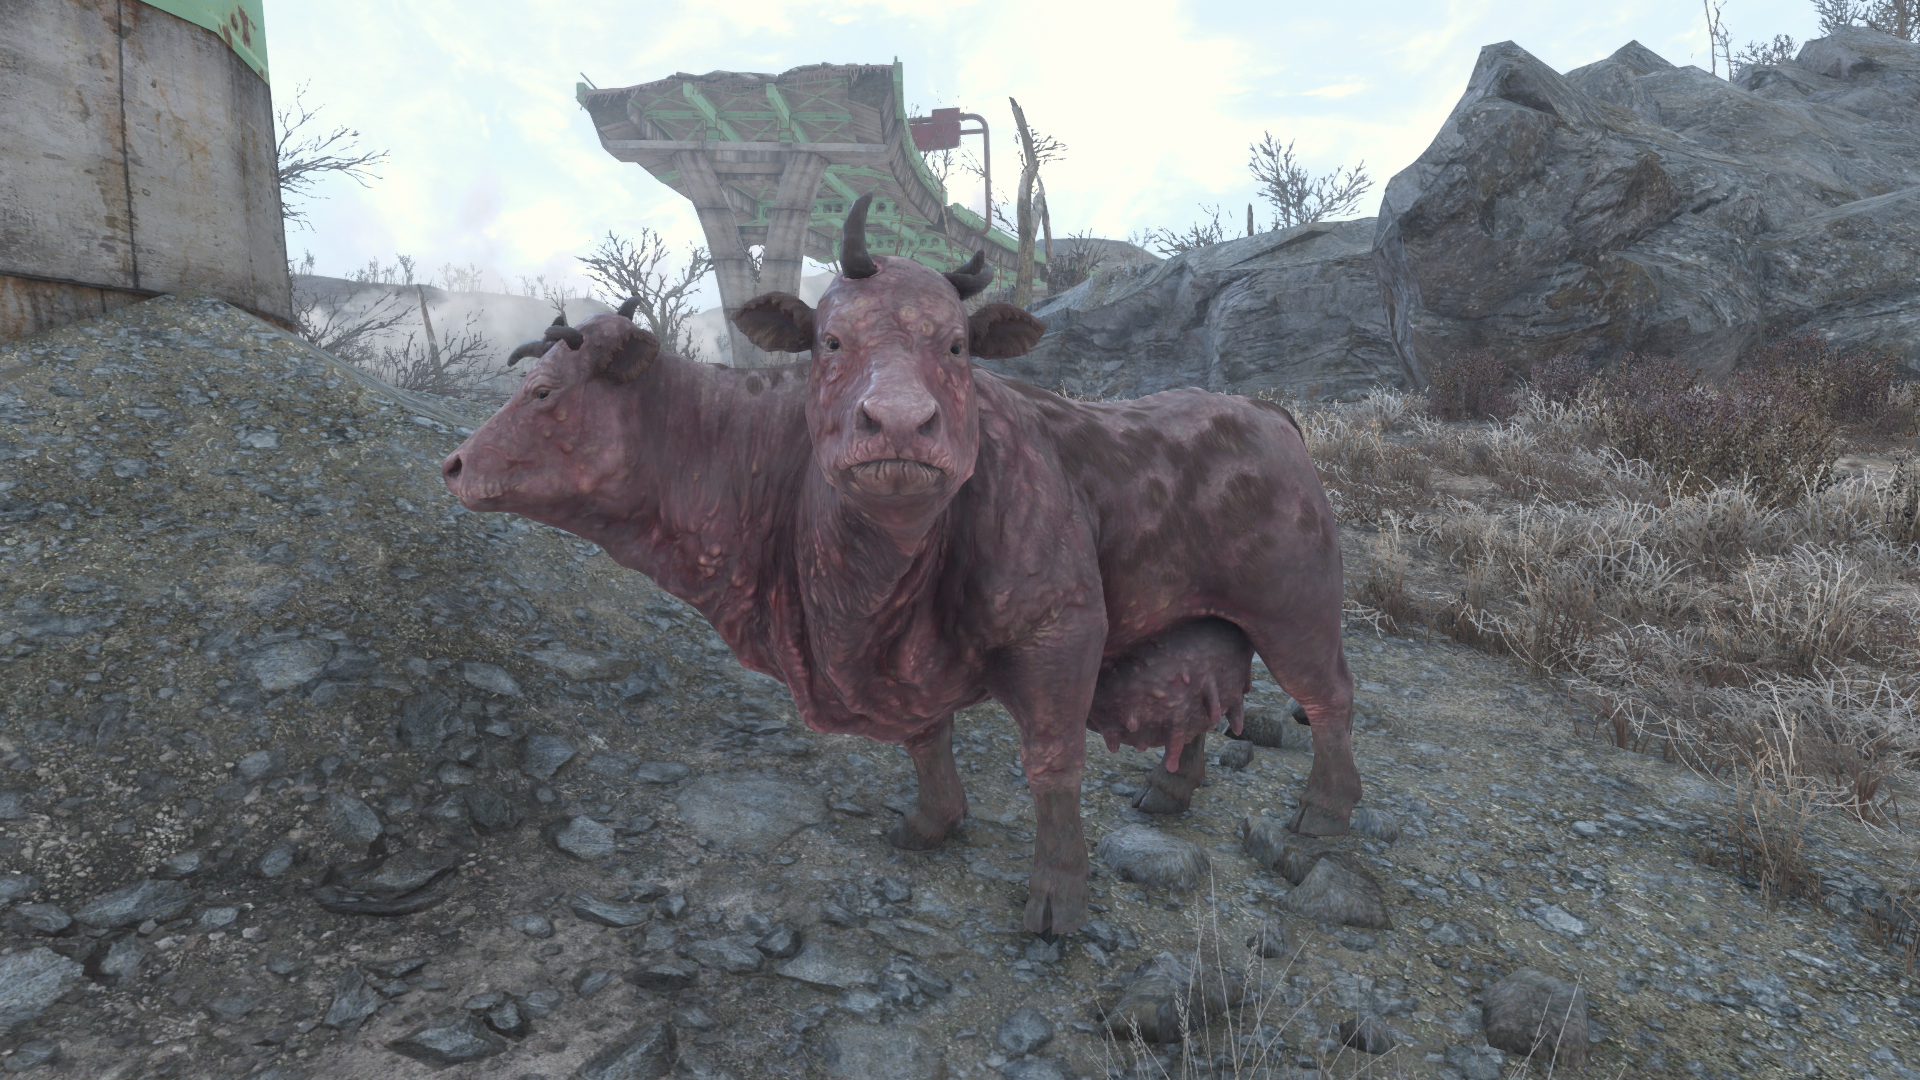 Fallout Fallout 4 Cow Creature Apocalyptic Video Games Pc Gaming Wallpaper Resolution 19x1080 Id Wallha Com